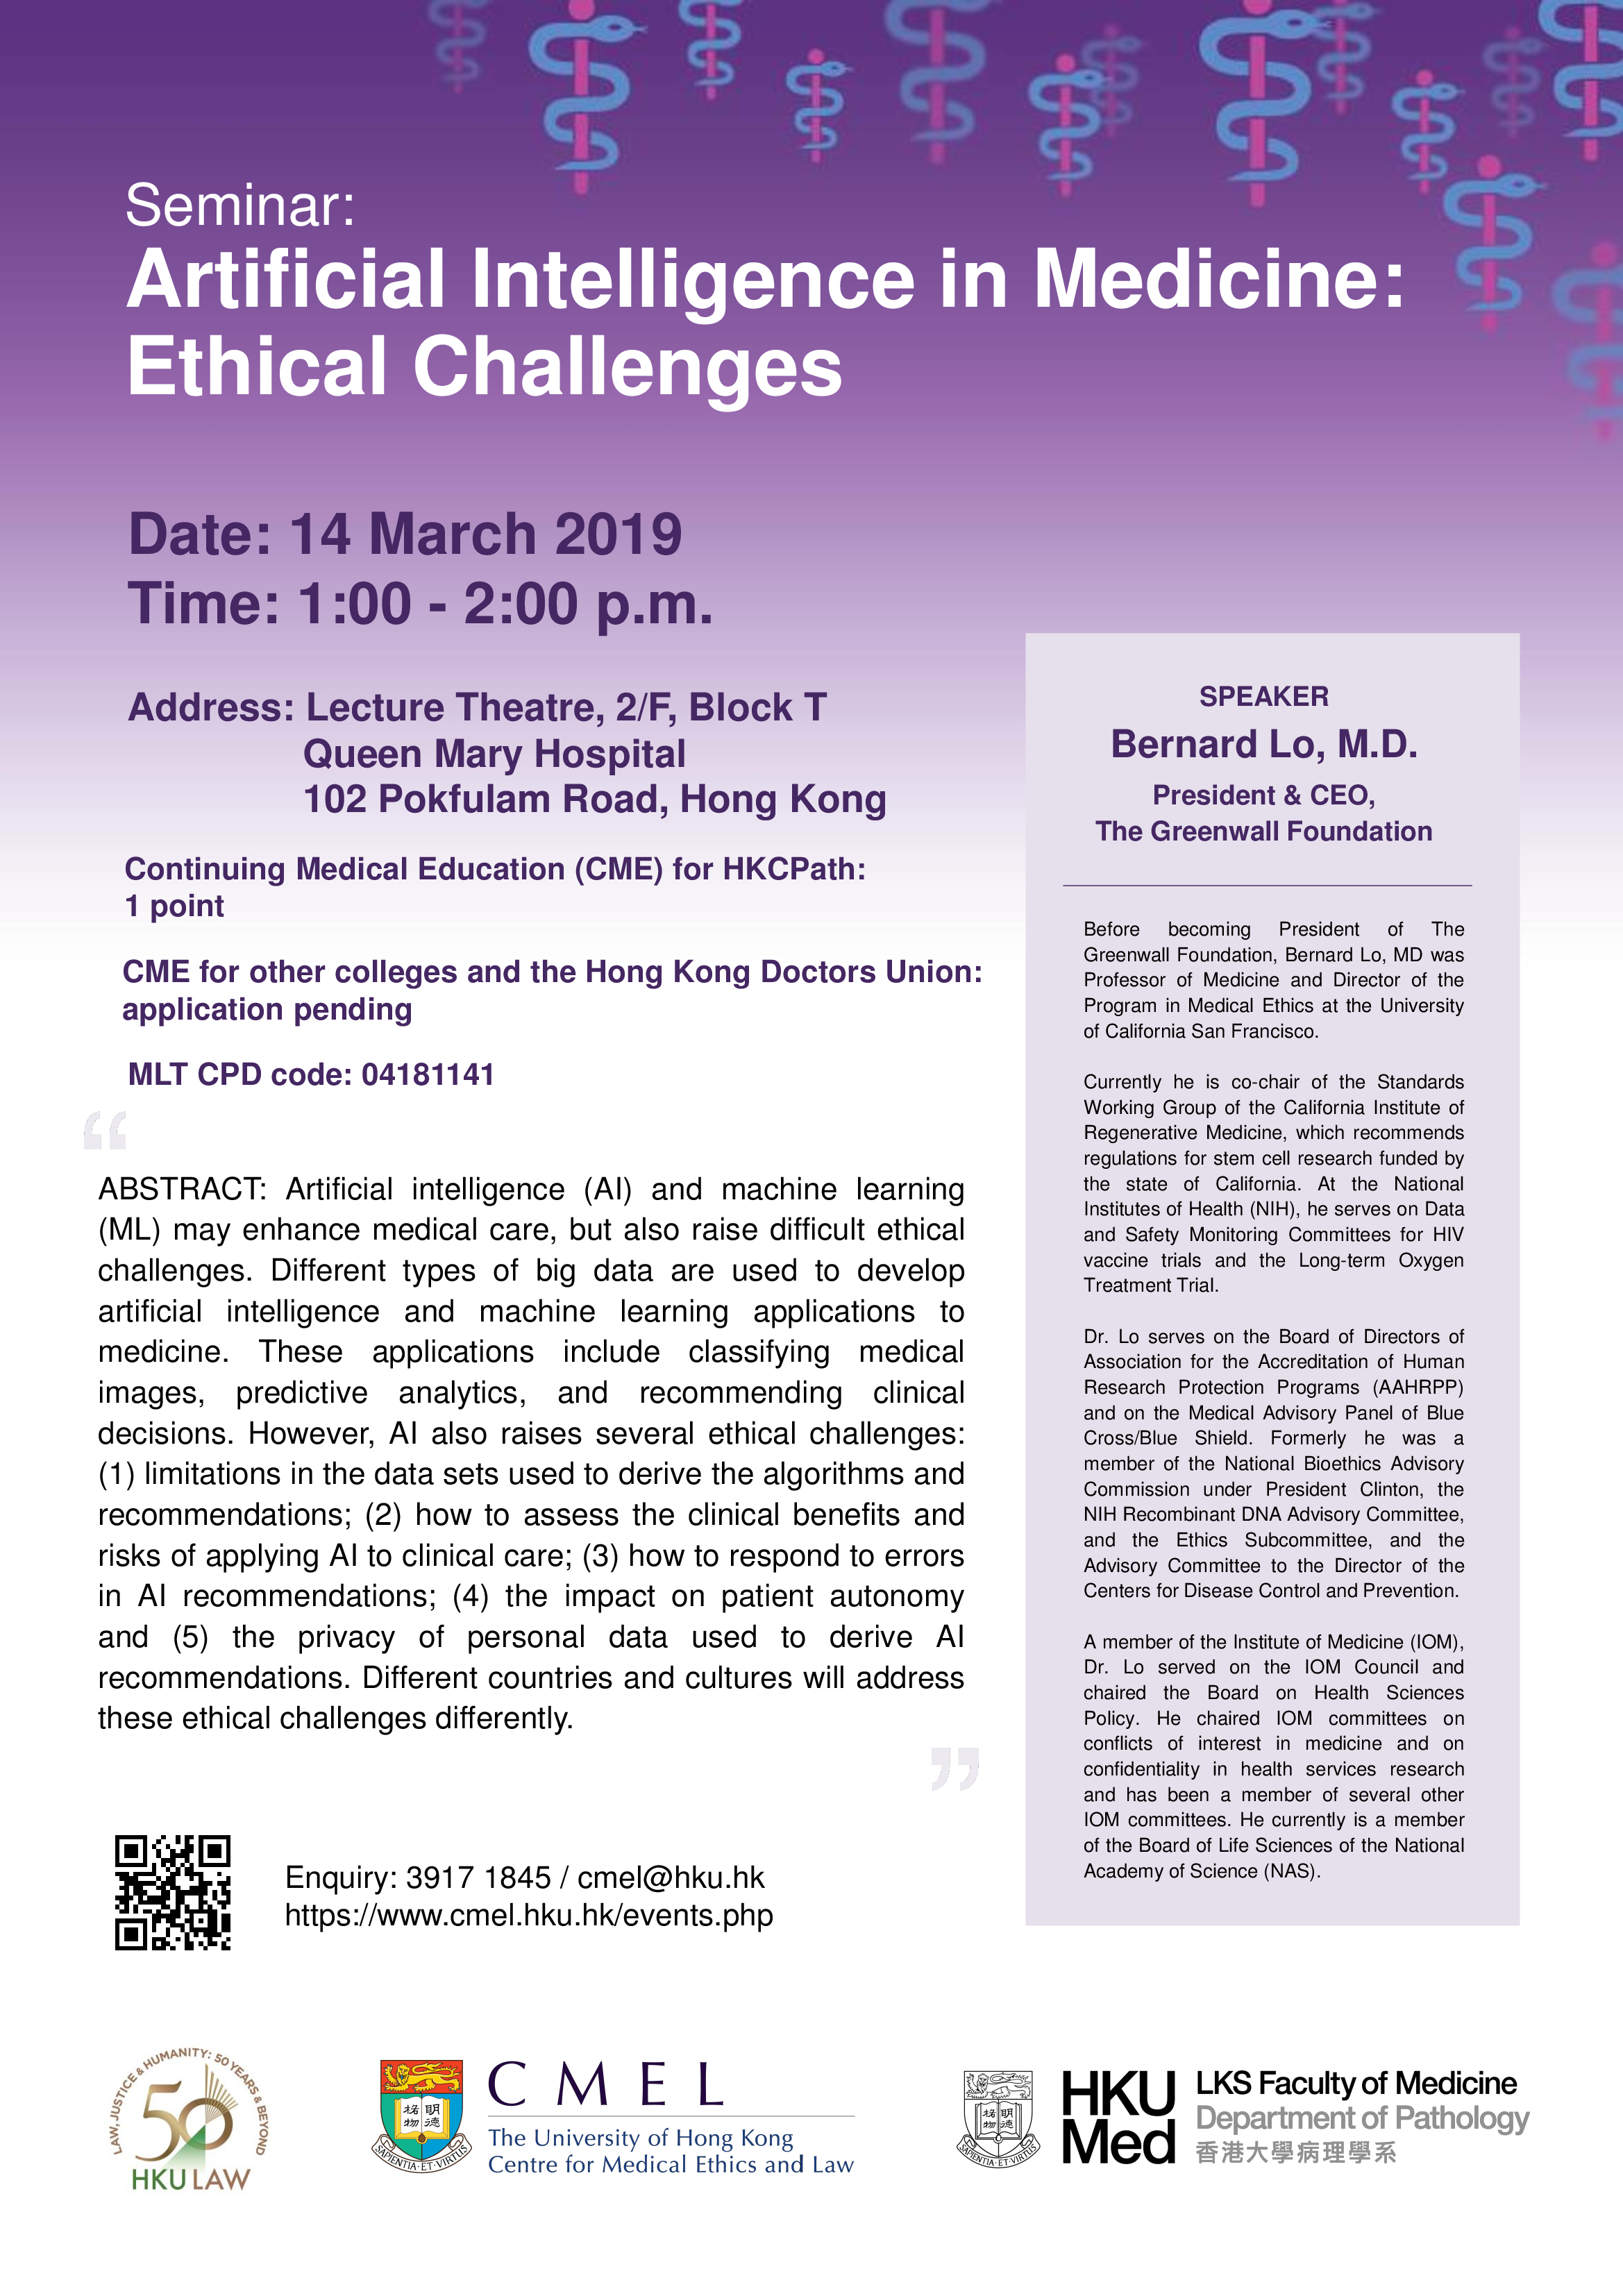 Seminar - Artificial Intelligence in Medicine: Ethical Challenges 14 Mar 2019